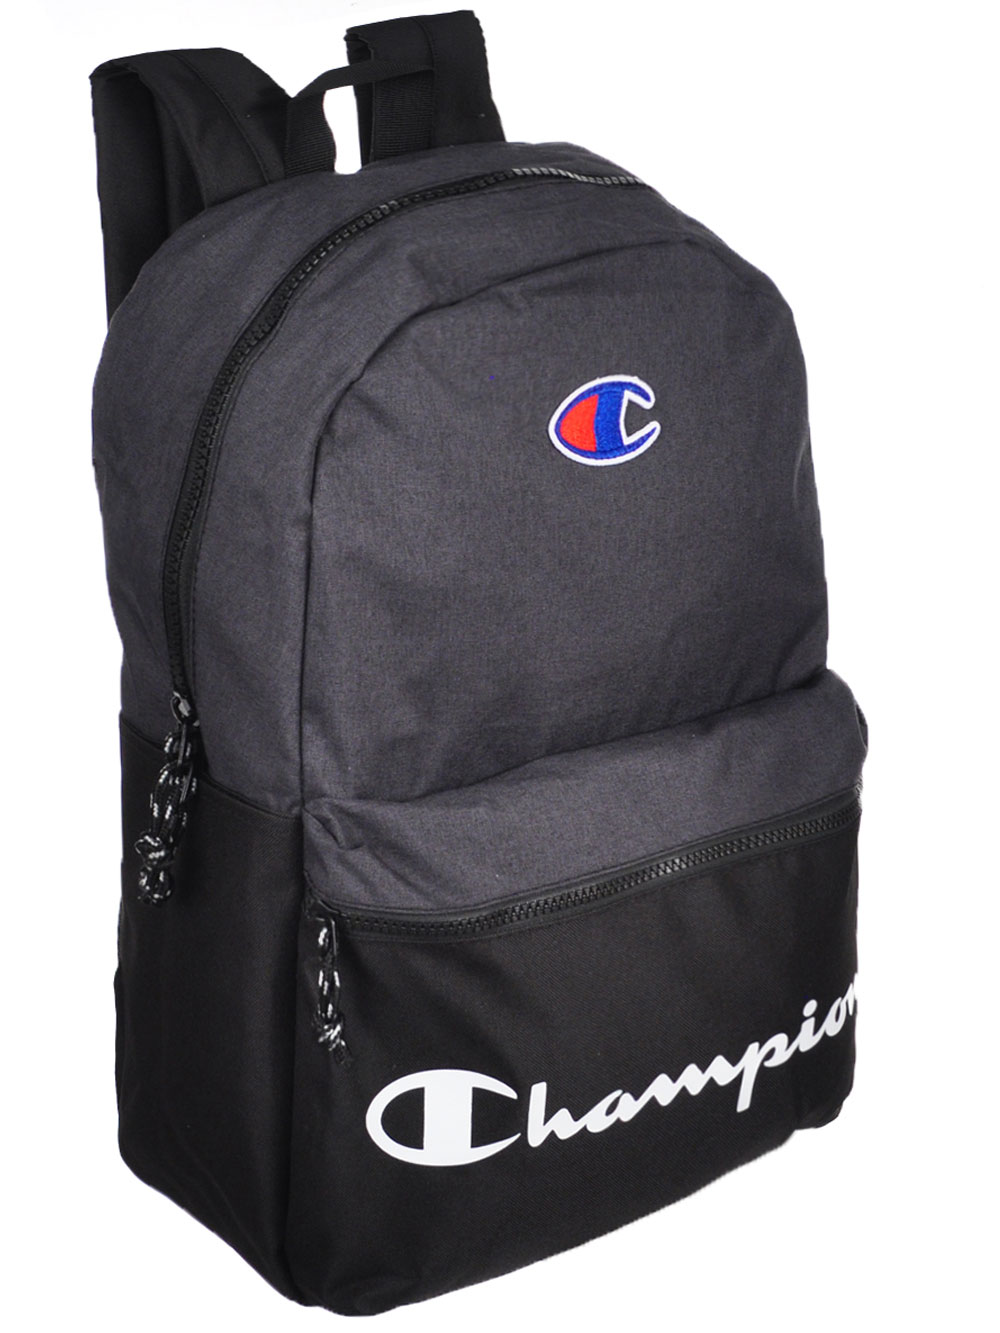 champion black and white backpack